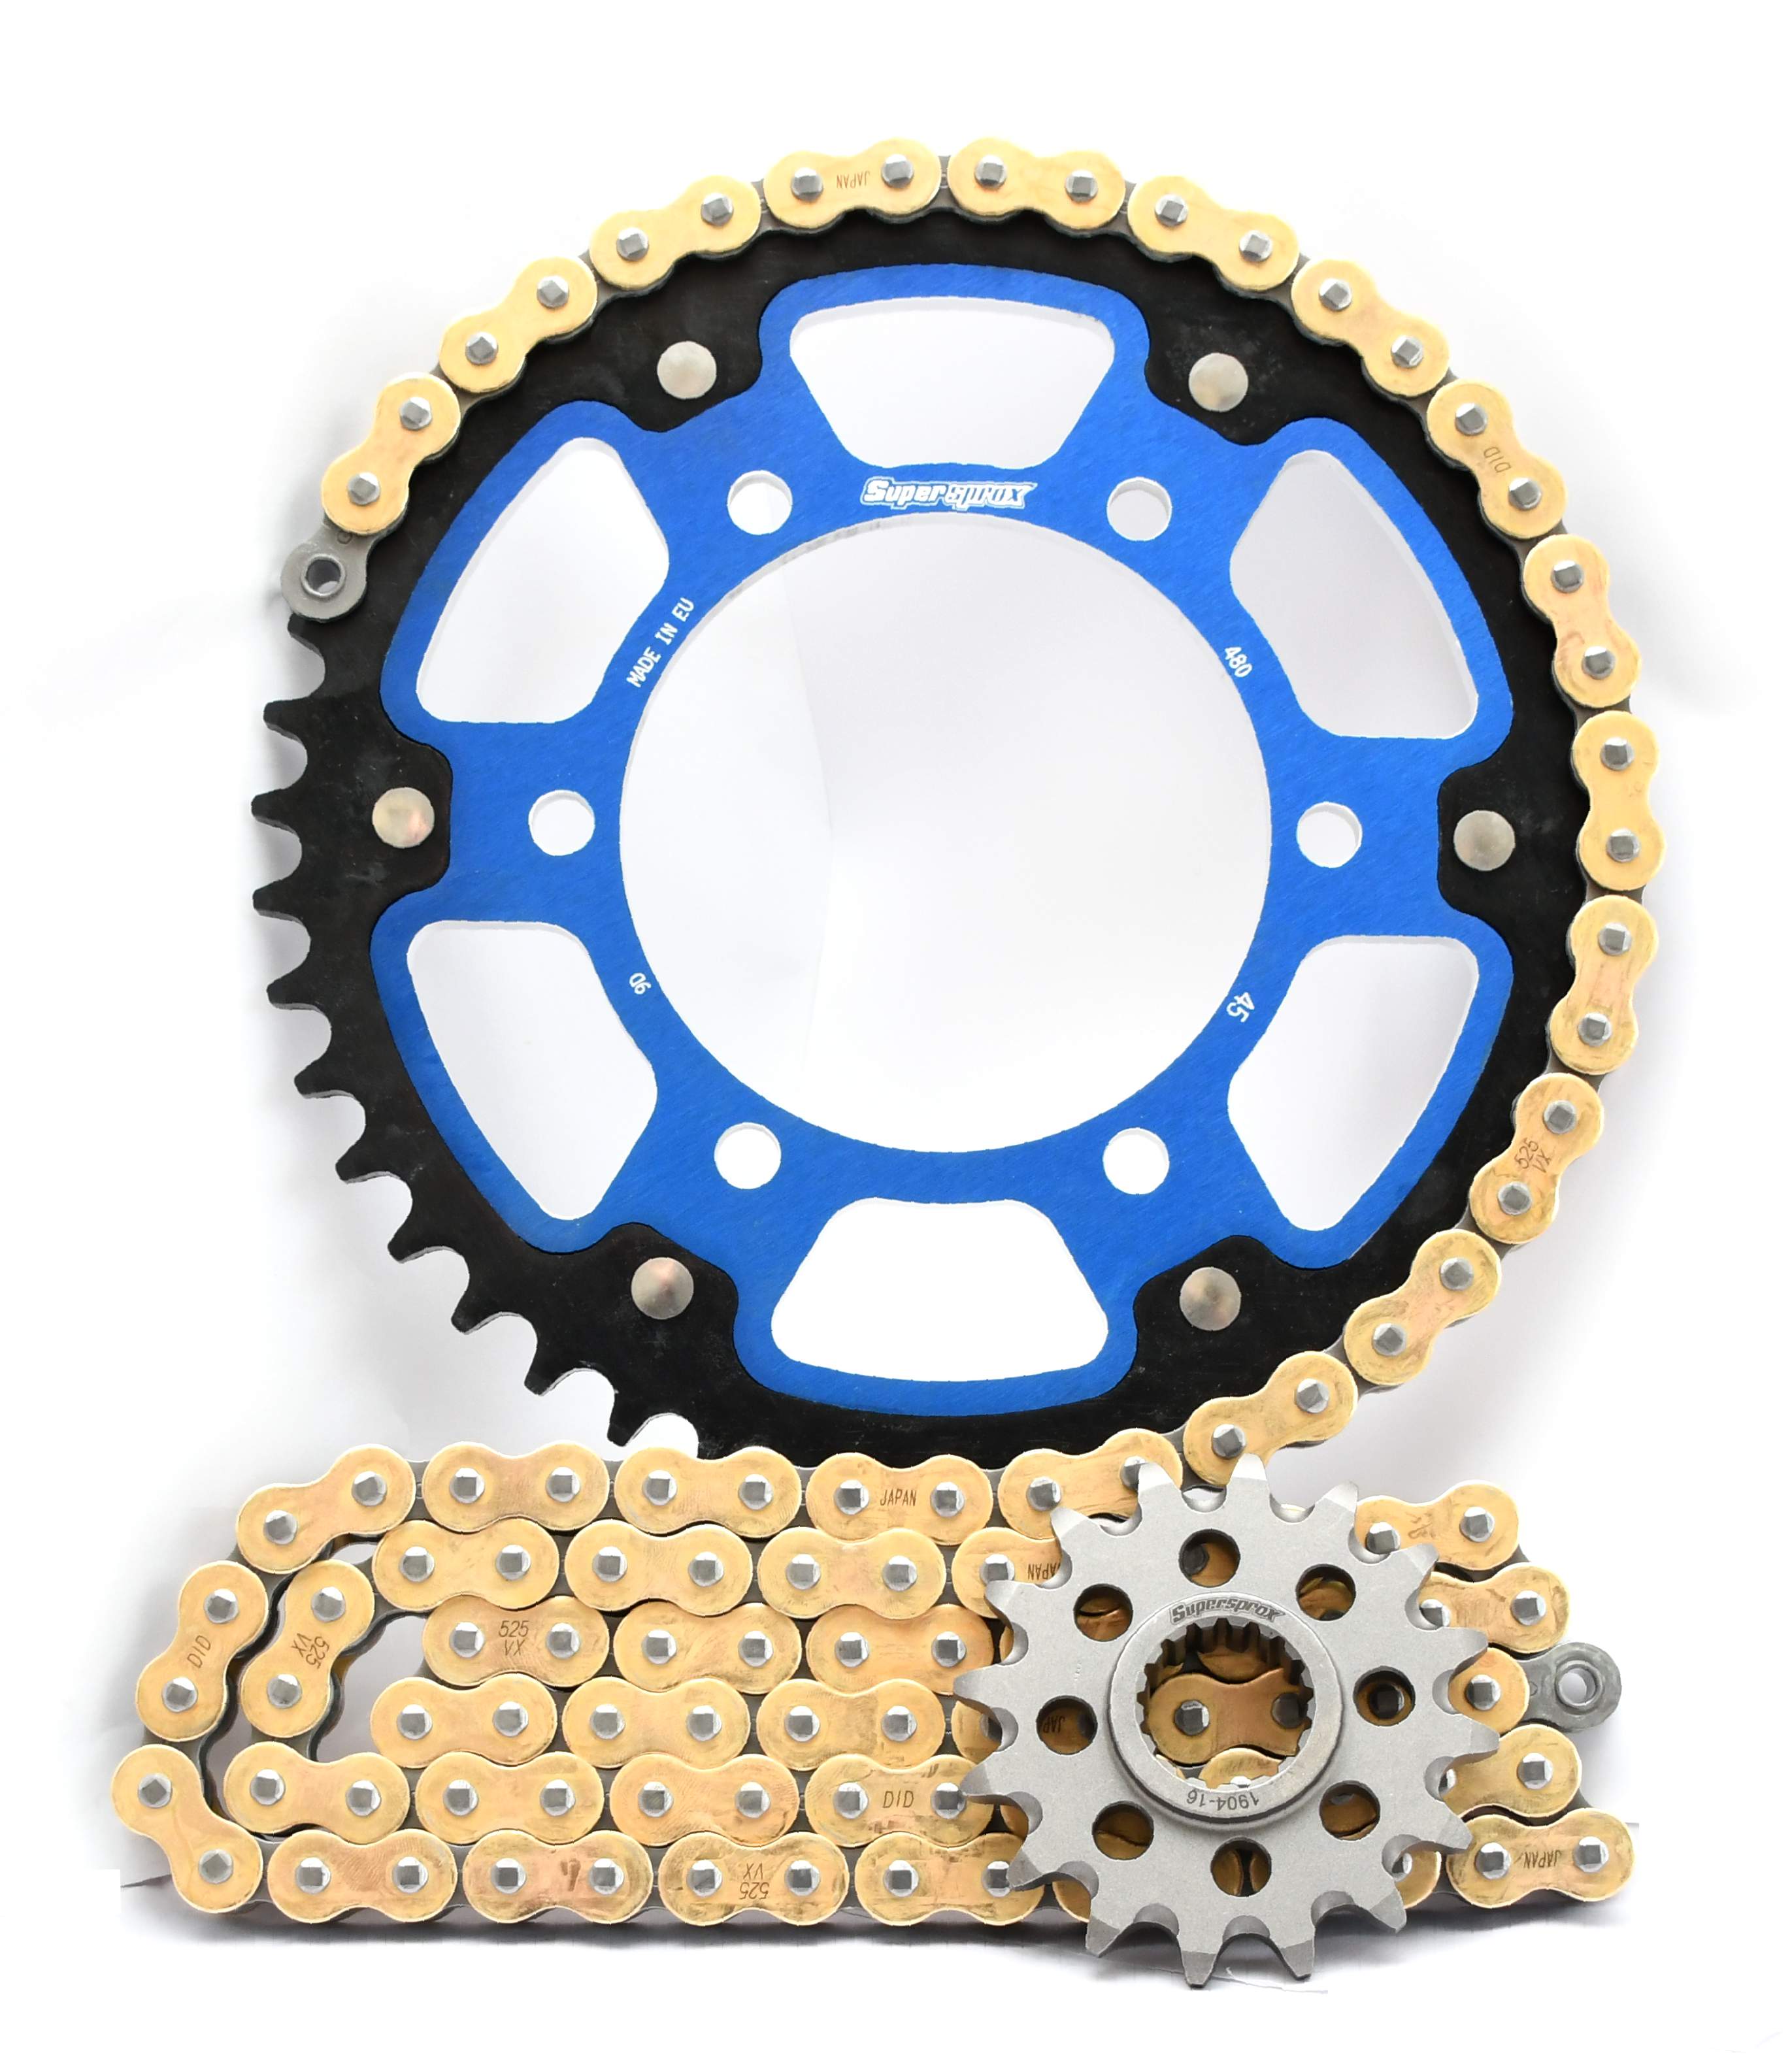 Supersprox Chain & Sprocket Kit for Yamaha YZF R1 2009-2014 - Standard Gearing - 0